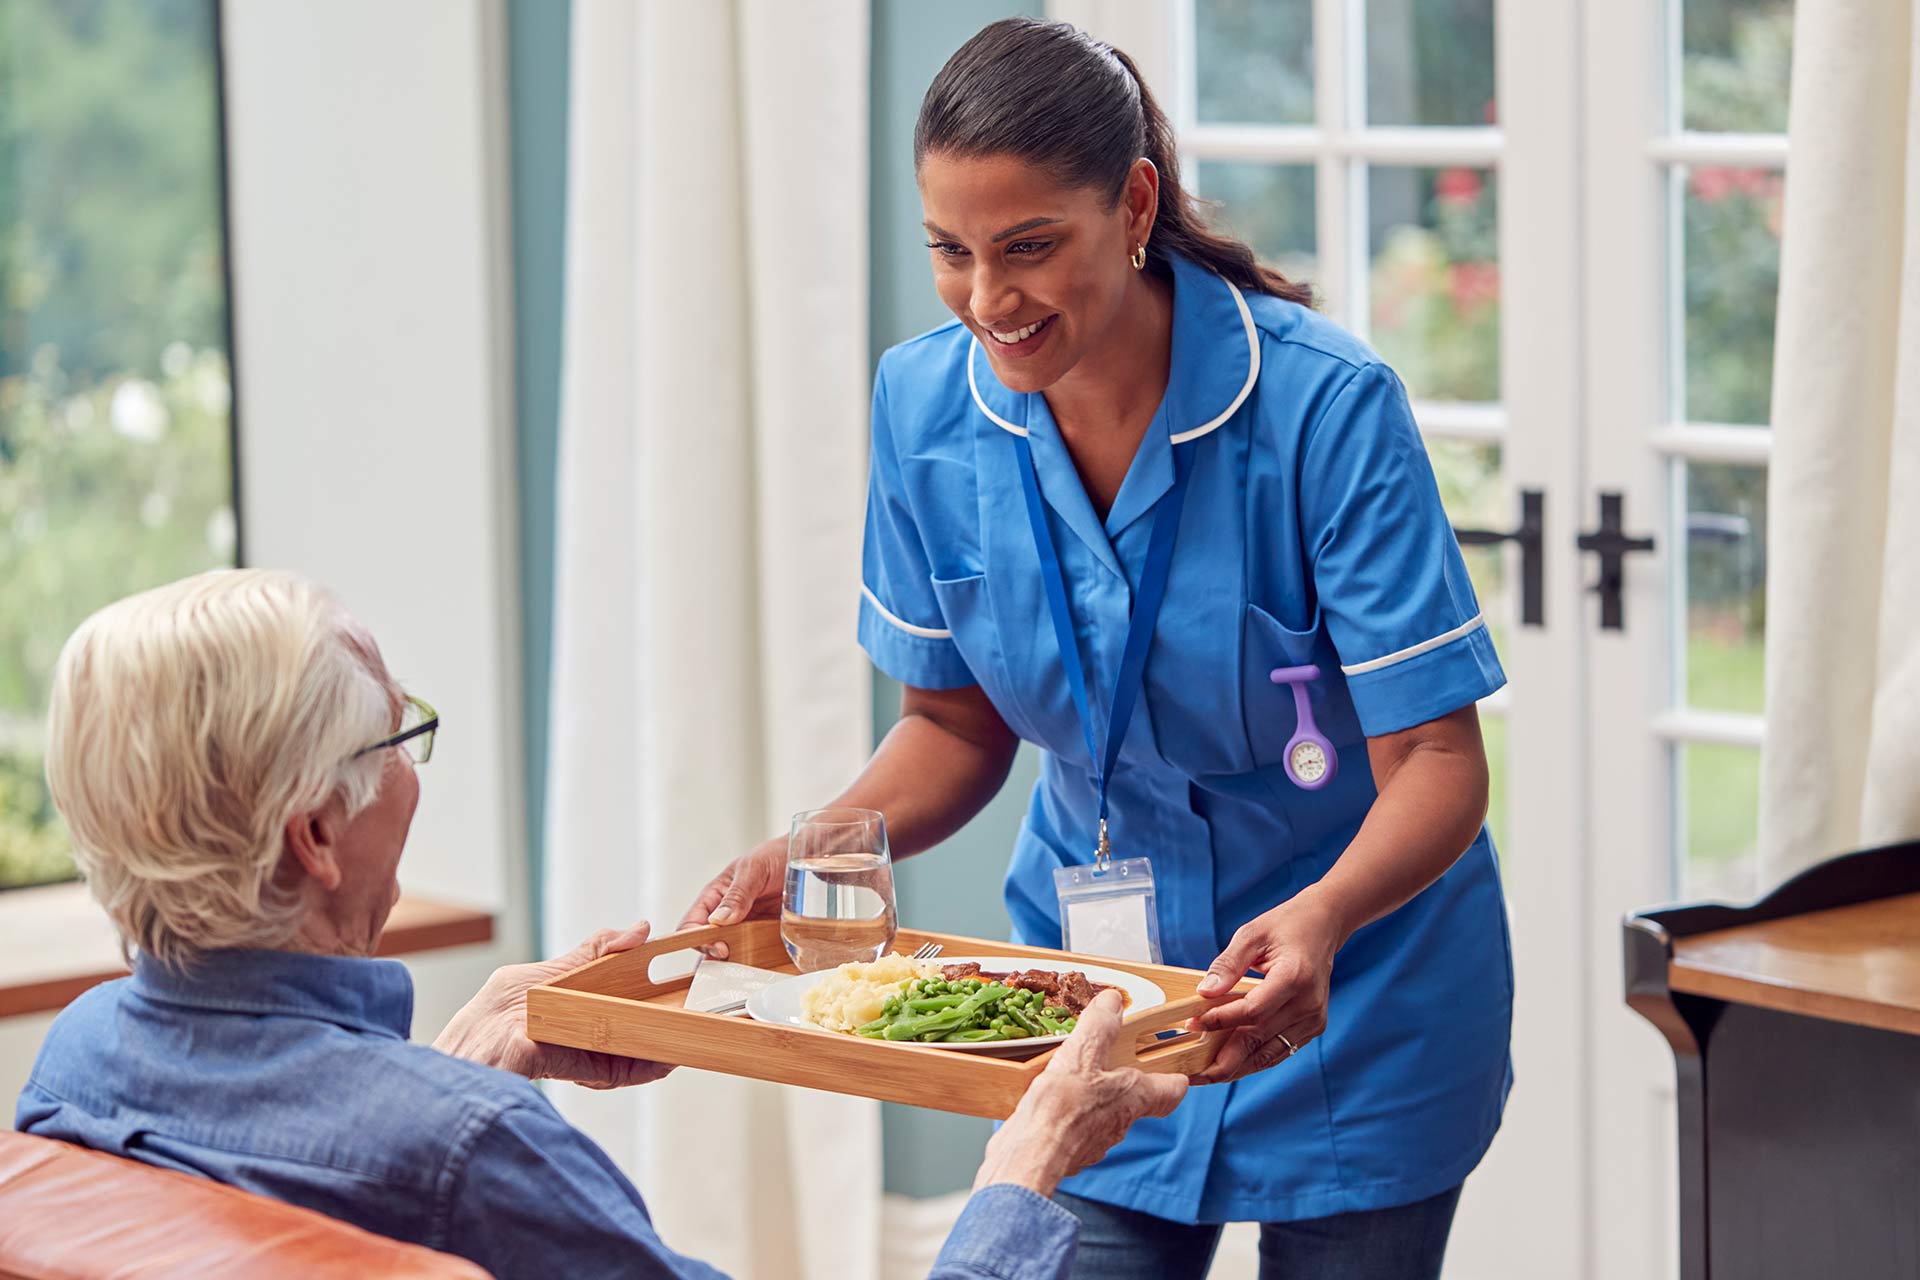 A female carer brings a tray containing a healthy meal and glass of water to a seated elderly person.